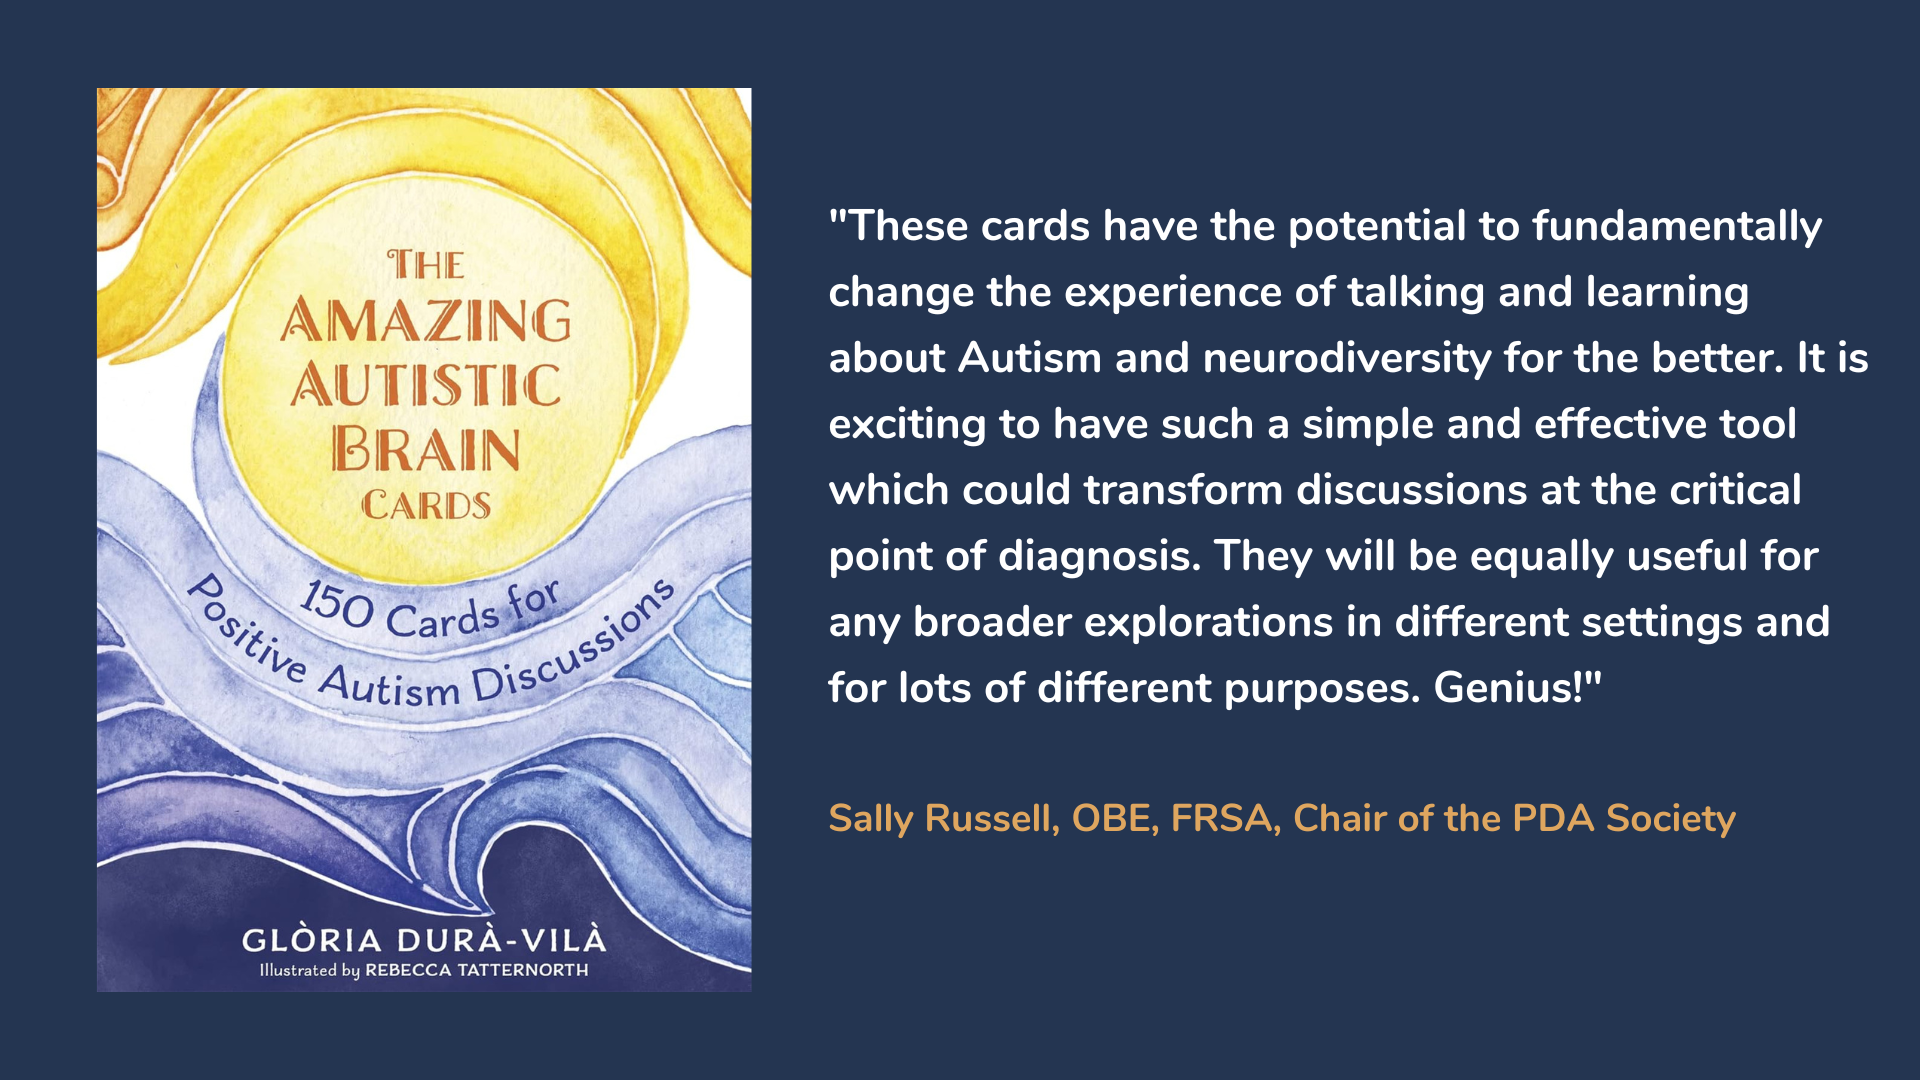 The Amazing Autistic Brain Cards. Product cover image and product review.